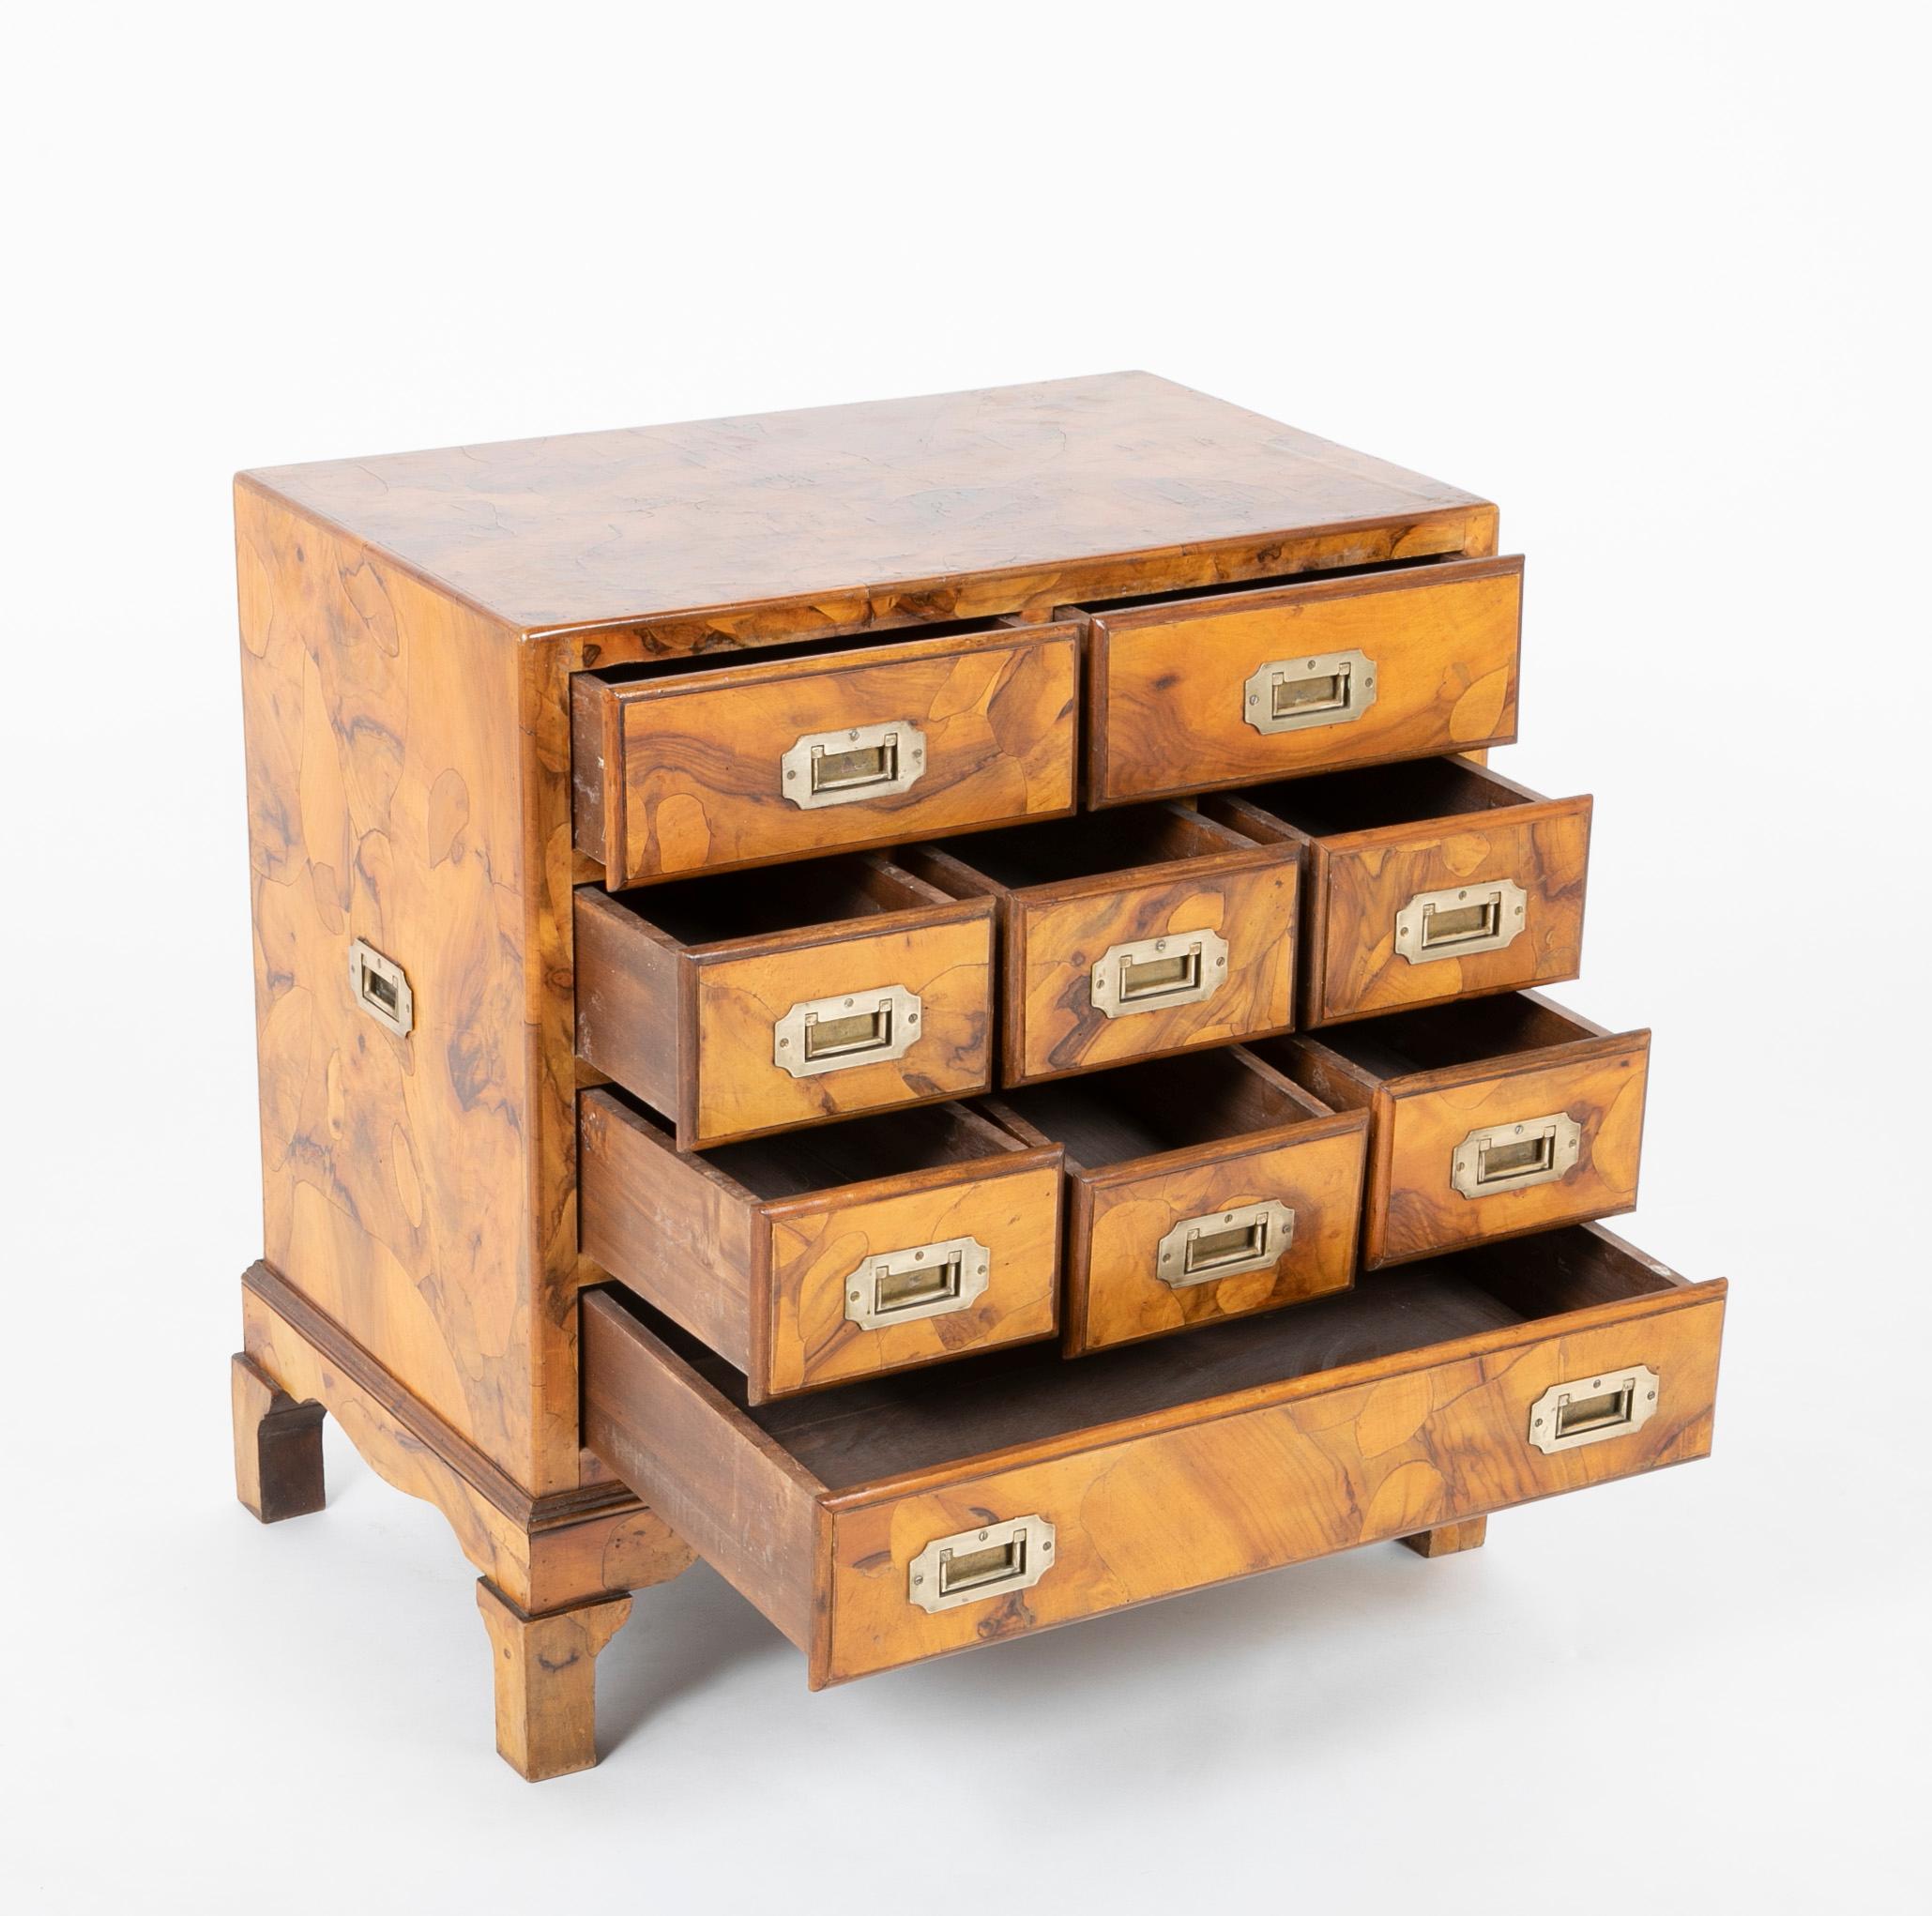 Italian Campaign Chest of Drawers with Olive Wood Veneer, Mid-20th Century For Sale 3